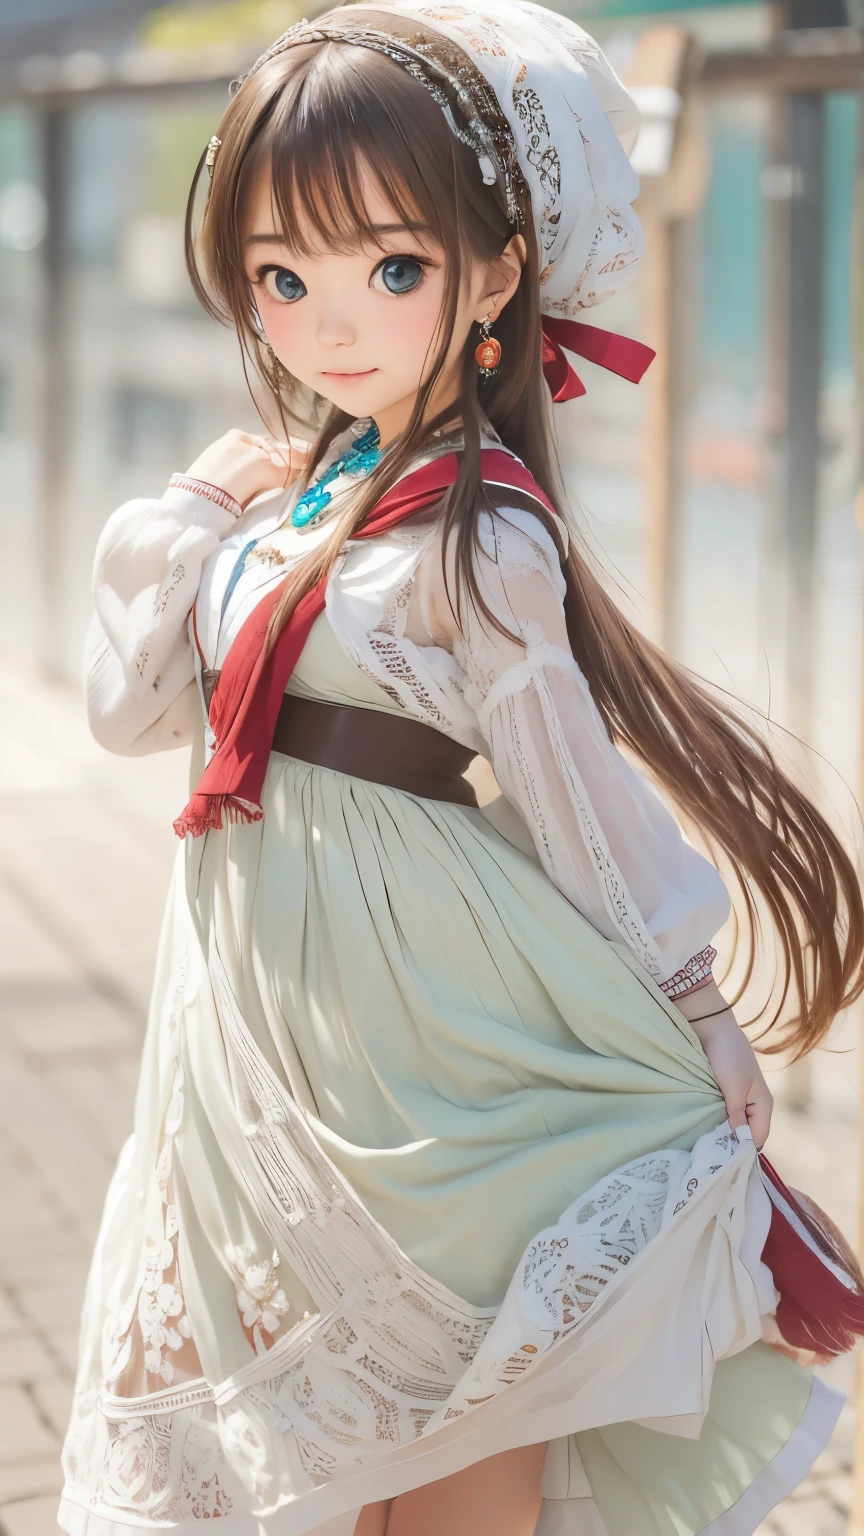 detailed face, cute face,brown eye, ((sfw: 1.4)), (sfw,She is wearing a long white embroidered skirt, a red blouse with lace, a white apron tied around her waist, blue socks, and brown leather shoes.A blue scarf is on her head. Yes, her accessories include necklaces, earrings, and bracelets. 1 Girl)), Ultra High Resolution, (Realistic: 1.4), RAW Photo, Best Quality, (Photorealistic Stick), Focus, Soft Light, ((15 years old)),  ((Japanese)), (( (young face))), (surface), (depth of field), masterpiece, (realistic), woman, bangs, ((1 girl))